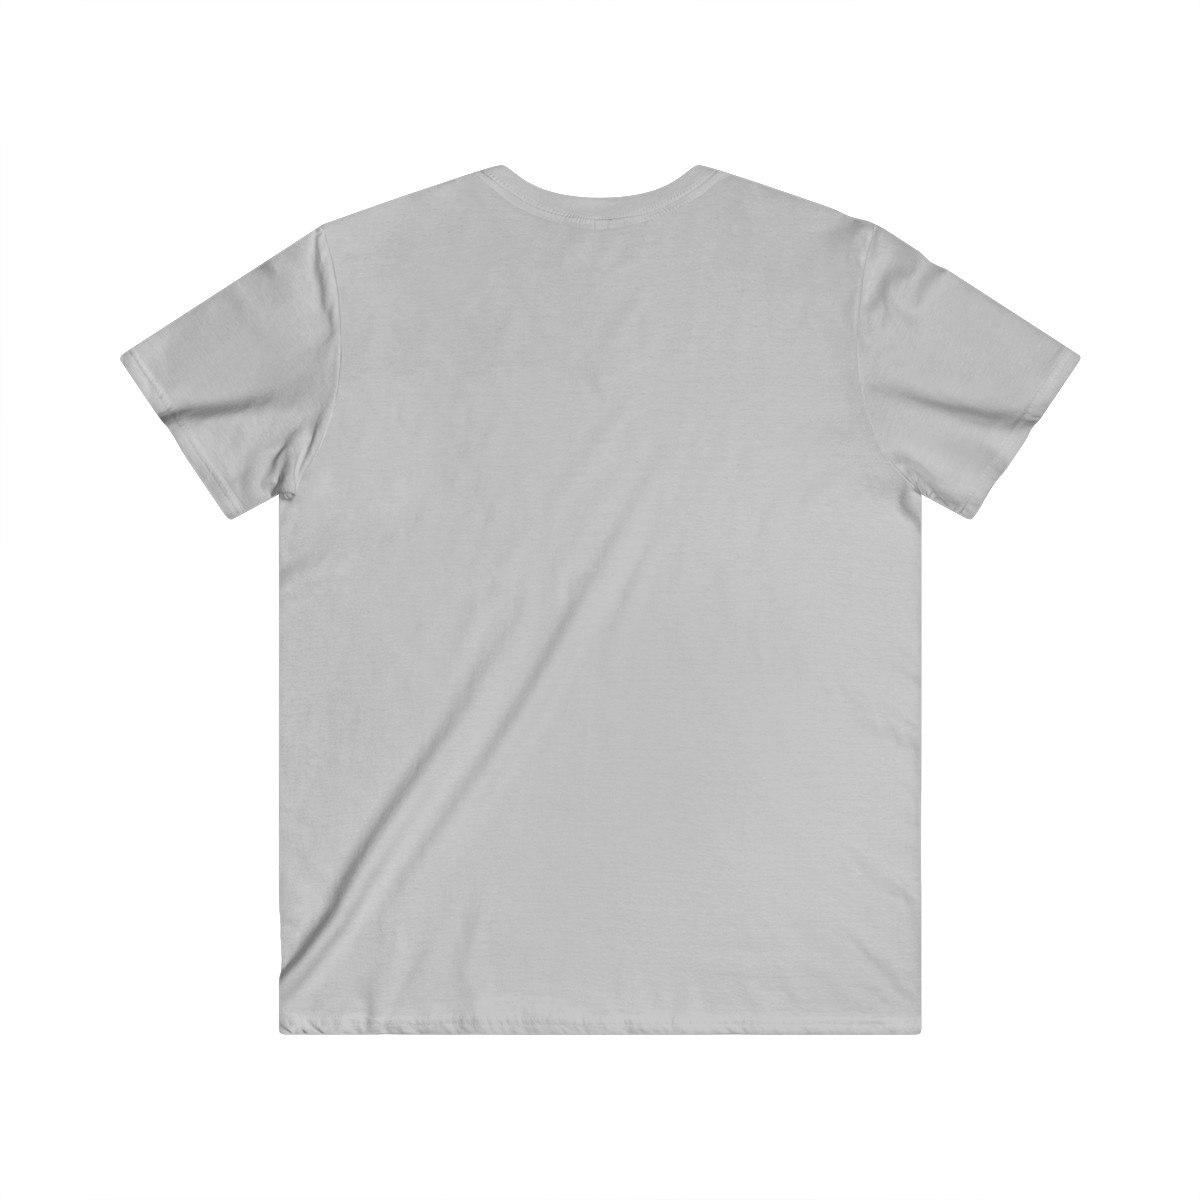 Men's Fitted V-Neck Short Sleeve Tee product thumbnail image